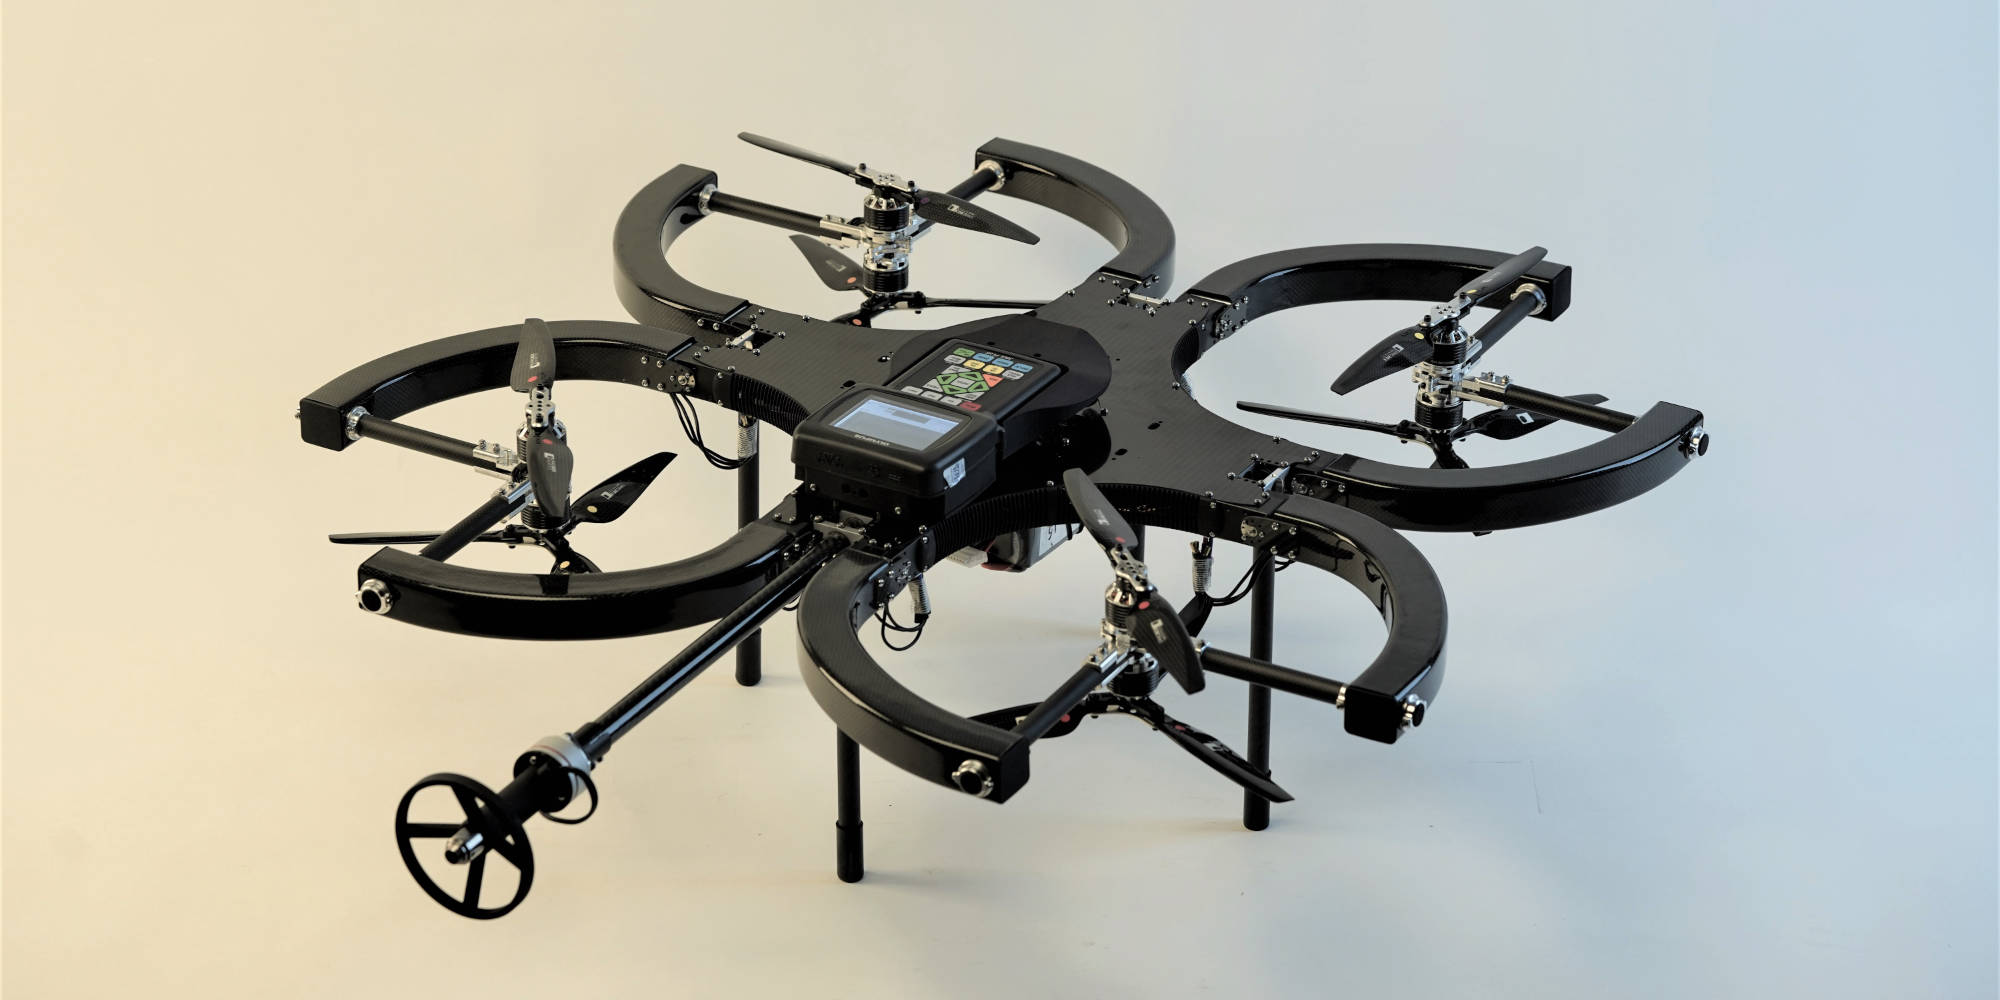 Skygauge Robotics’ inspection drone is now available for pre-order, with the first 10 units receiving a special early adopter price. The drone is eq